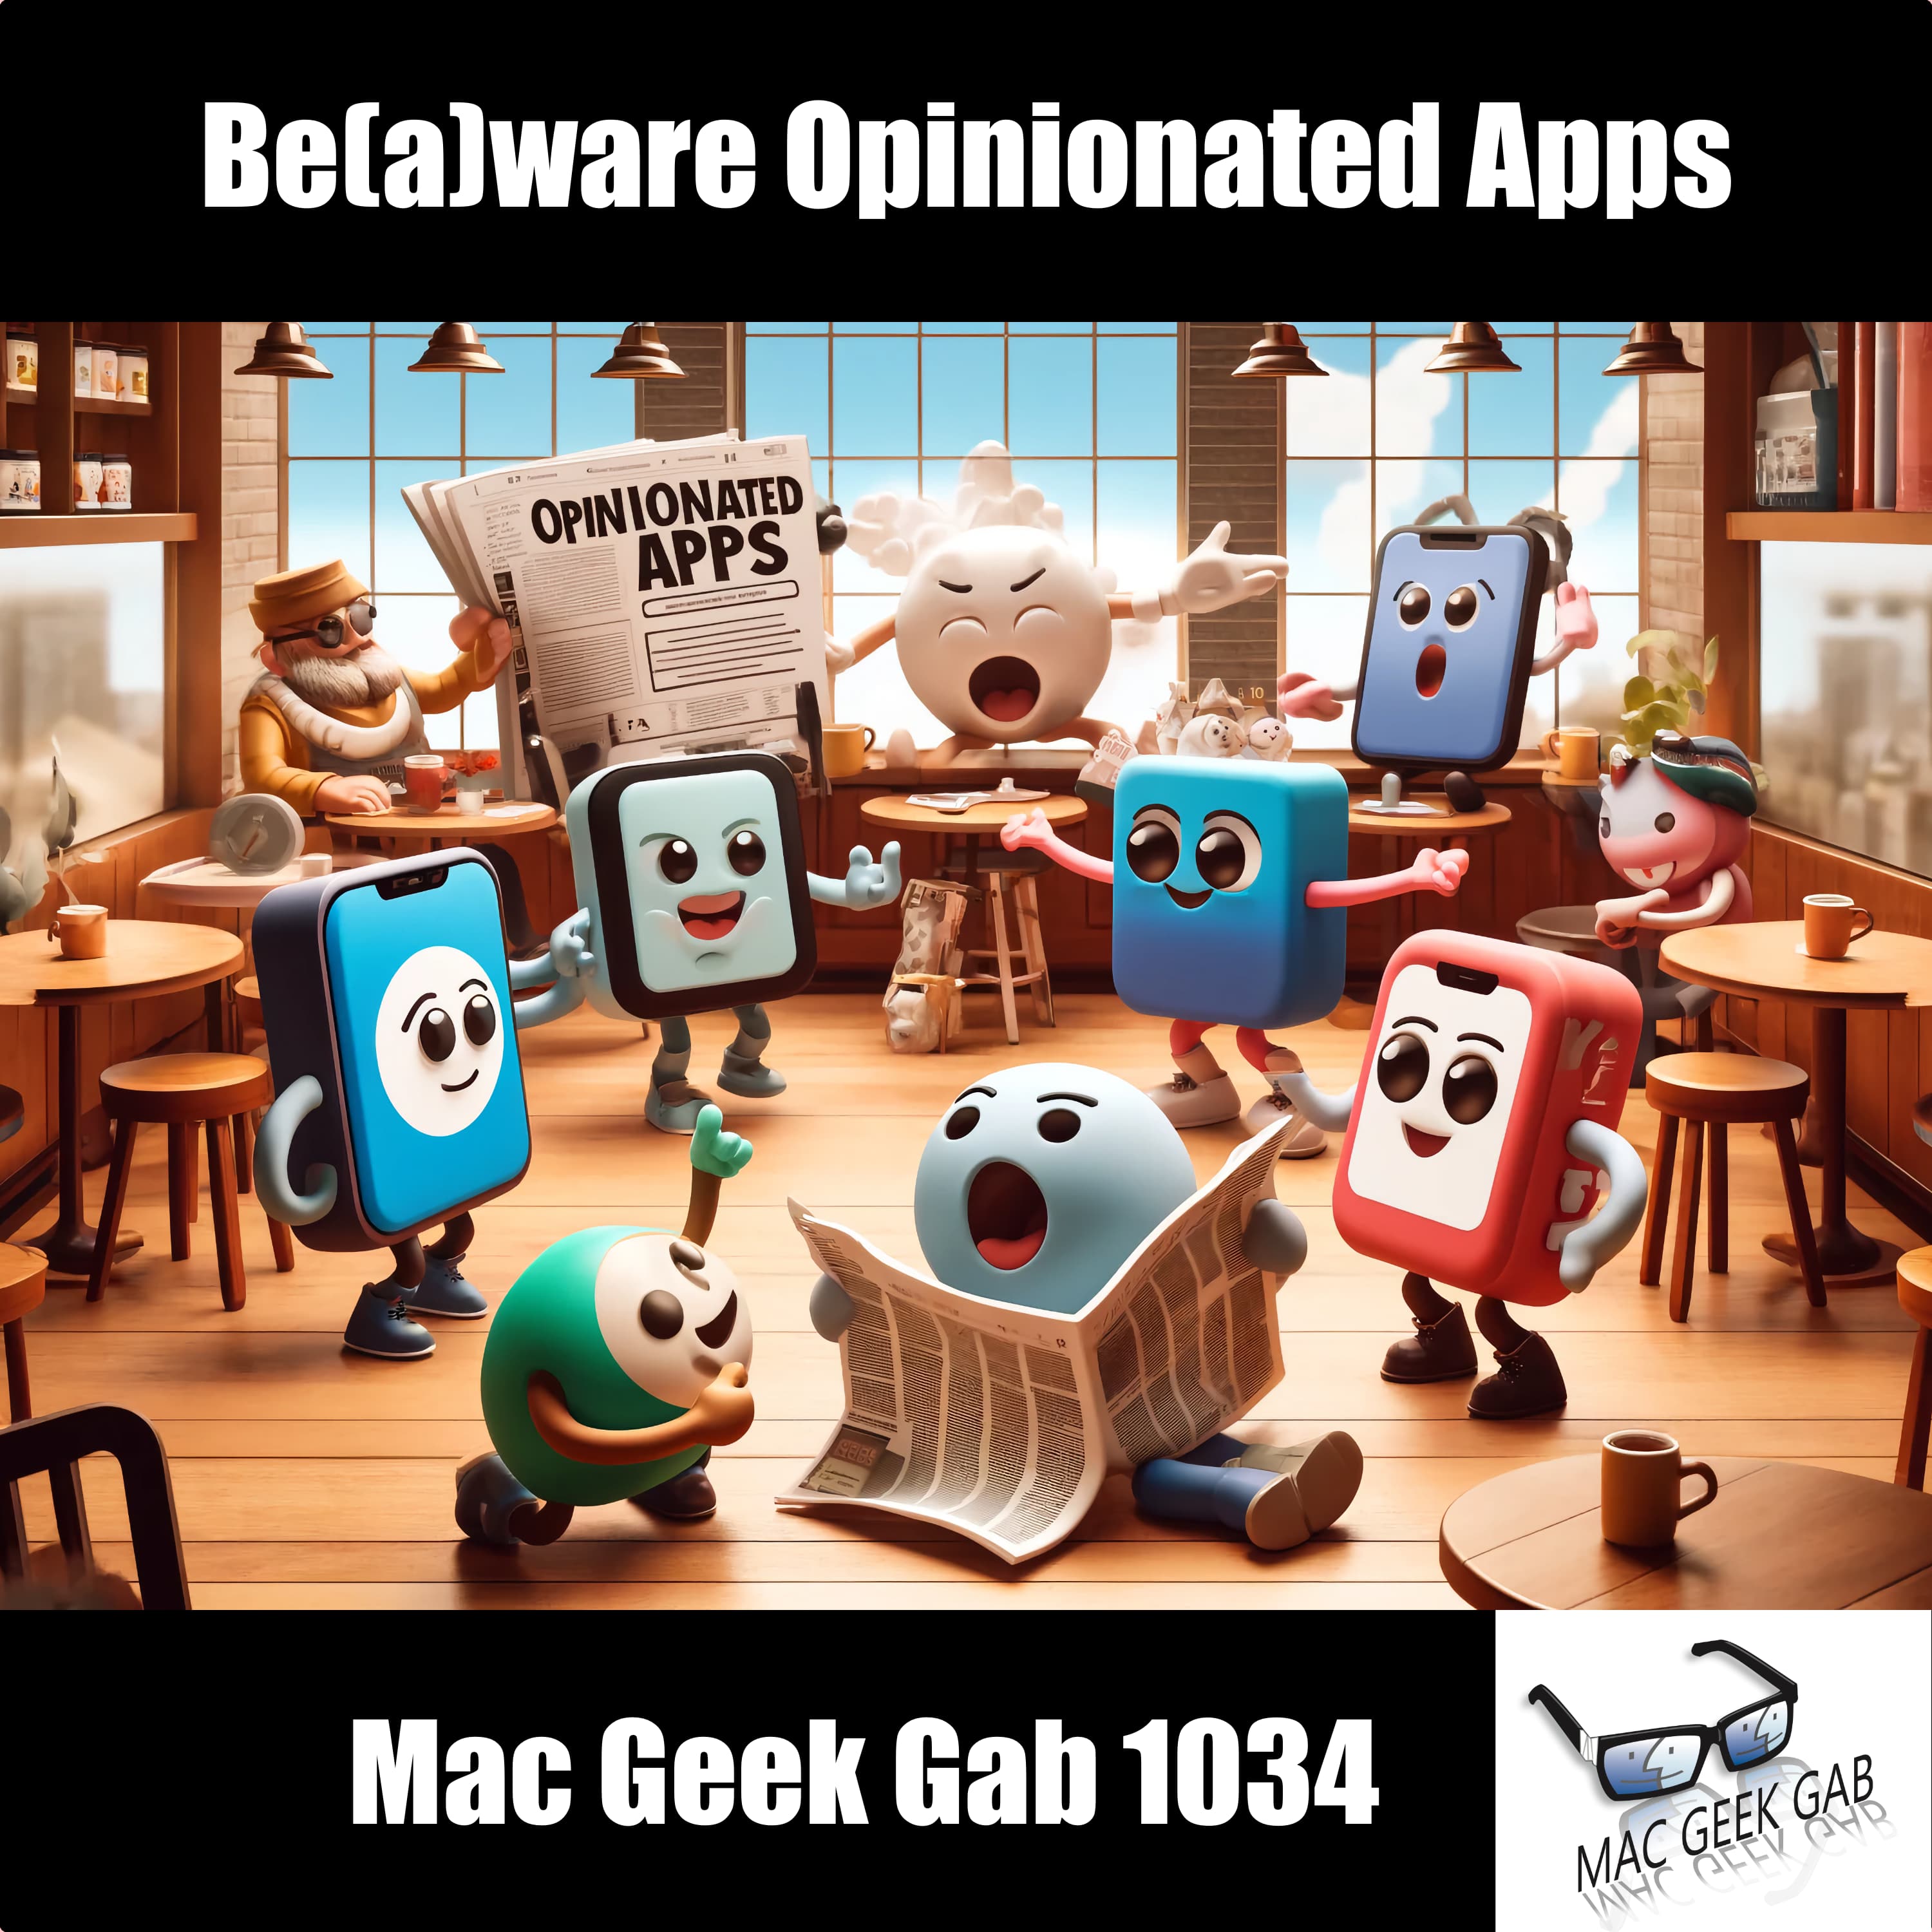 Be(a)ware Opinionated Apps